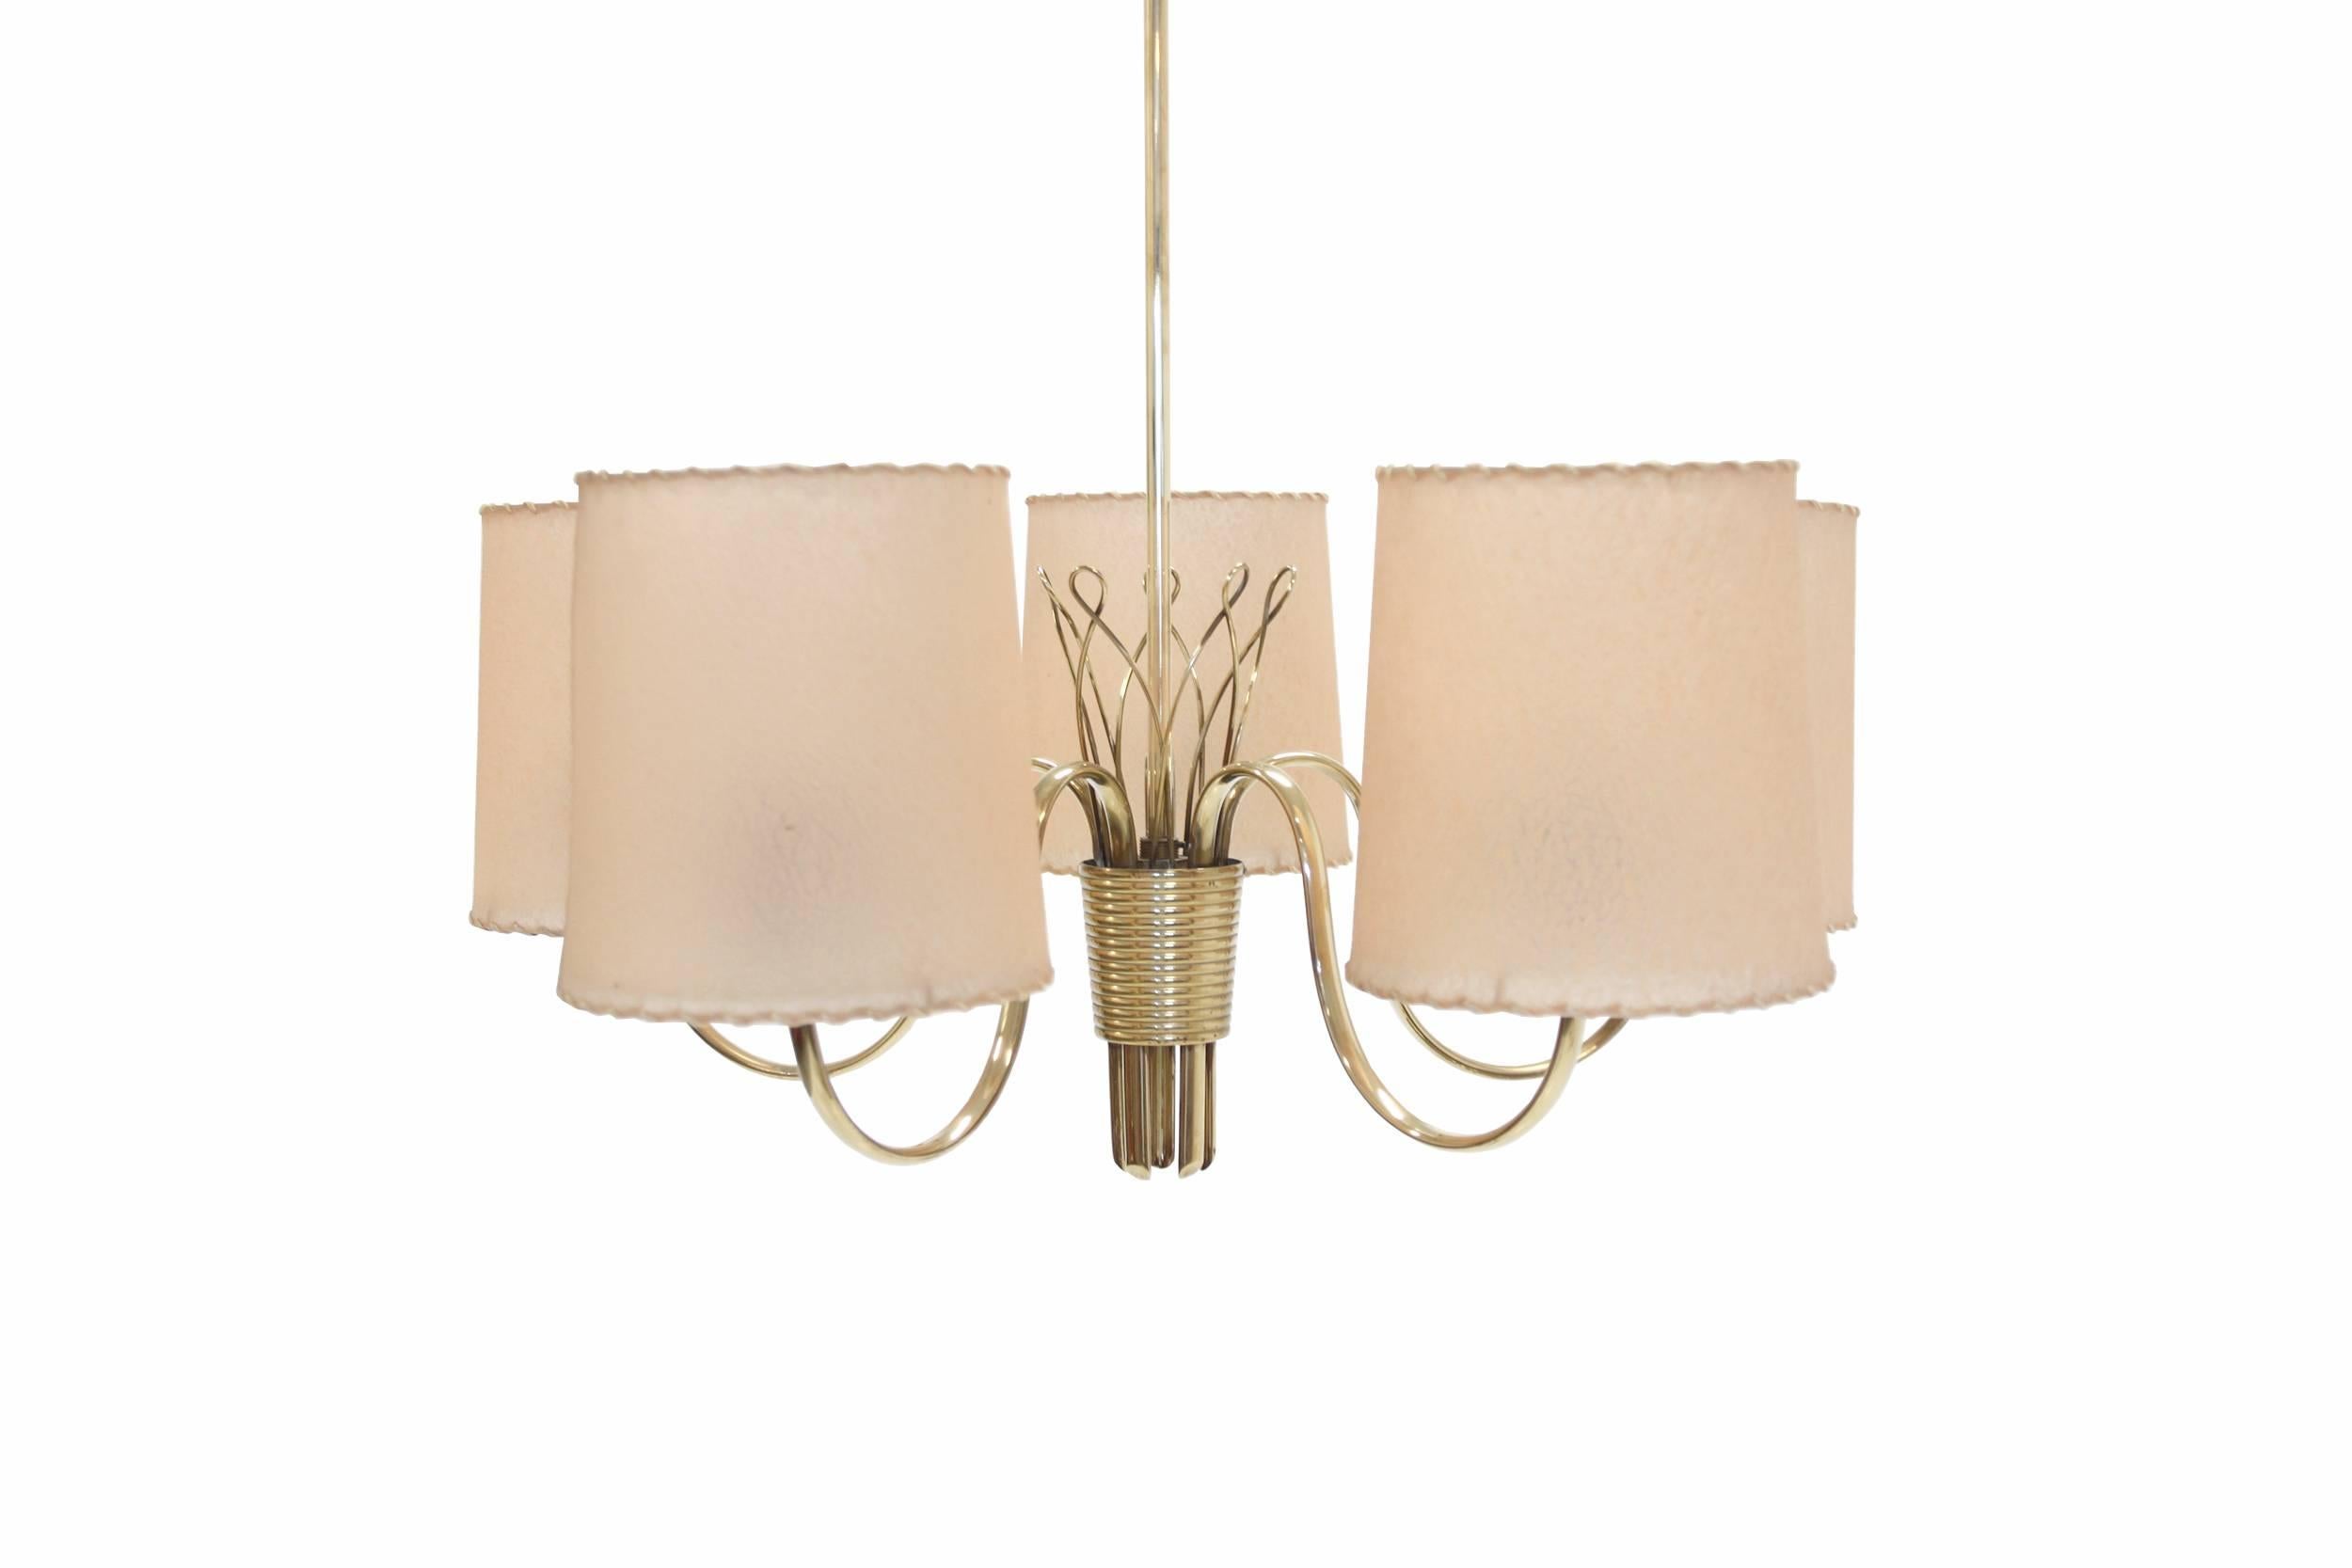 Wonderful and well made five-armed chandelier on a brass frame and frosted glass.

This is model 9031. Designed by Paavo Tynell and made in Finland by Taito circa 1960s second half.

The lamp is fully working and in excellent vintage